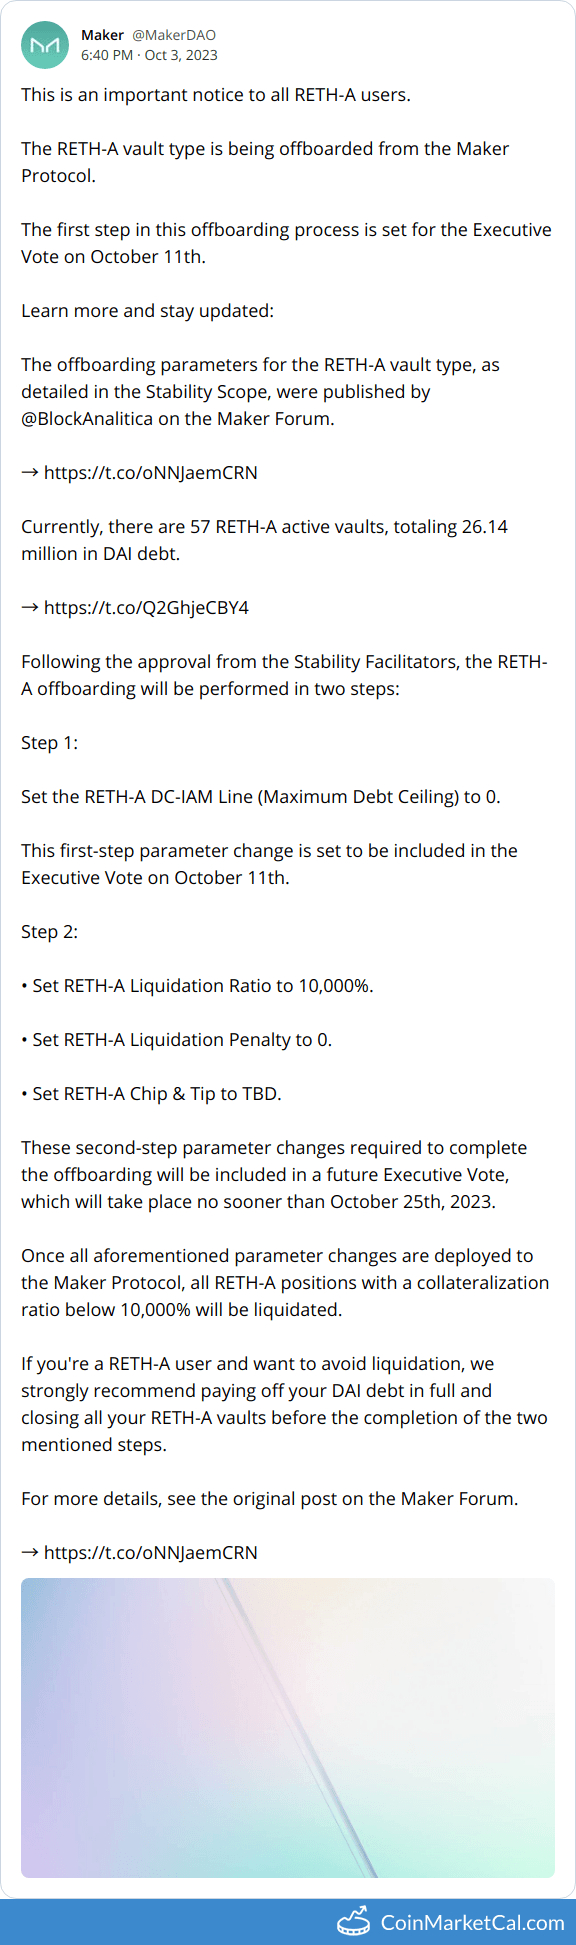 RETH-A Offboarding Vote image